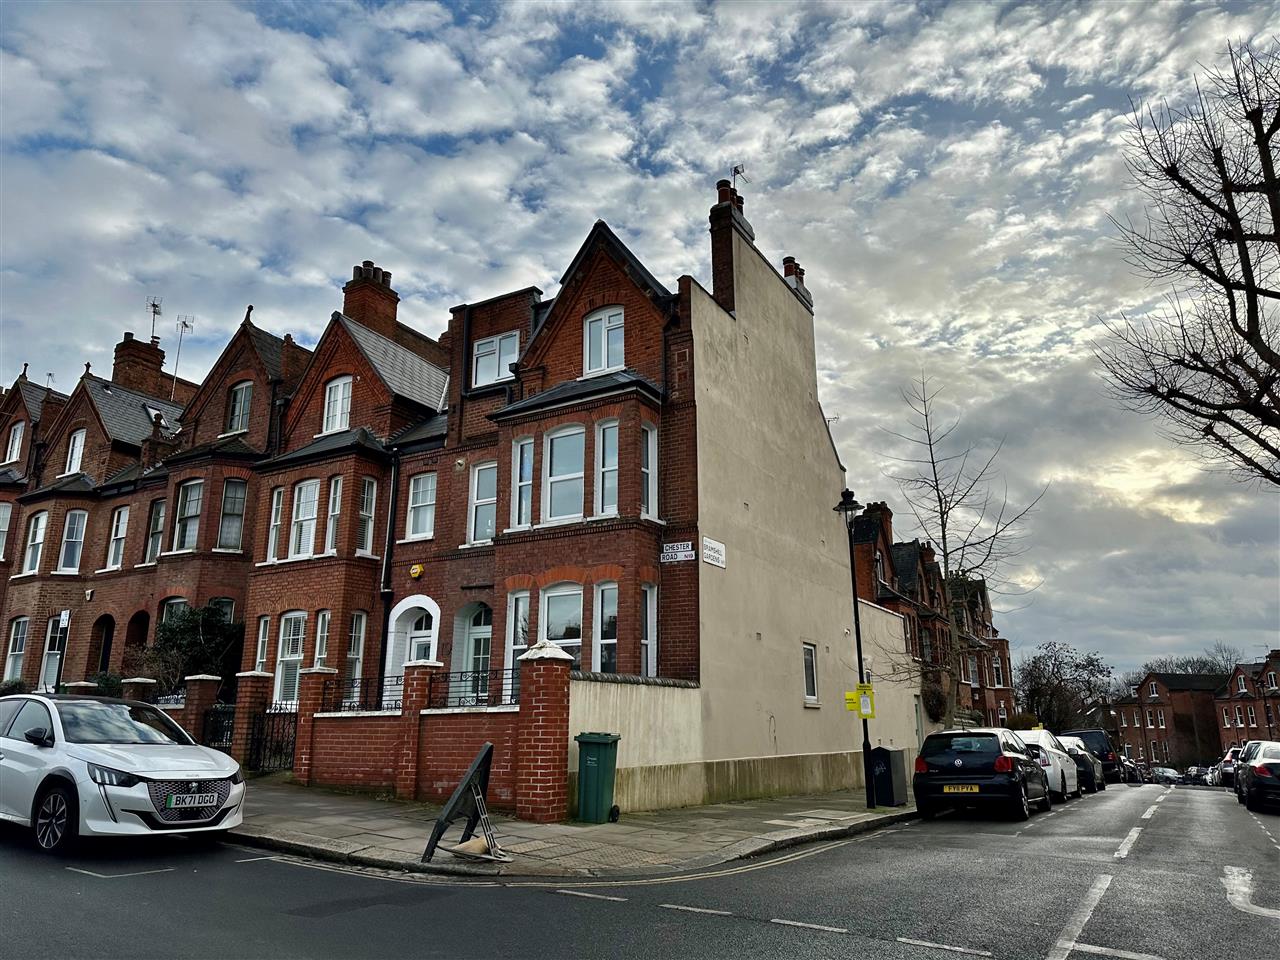 AVAILABLE FROM 22ND JULY 2023 (TBC) TO A MAXIMUM OF TWO NON-RELATED SHARERS OR A FAMILY. Located in a quiet residential and popular Dartmouth Park turning is this ground floor UNFURNISHED converted flat within a corner period house. The accommodation comprises of two double bedrooms, reception ...